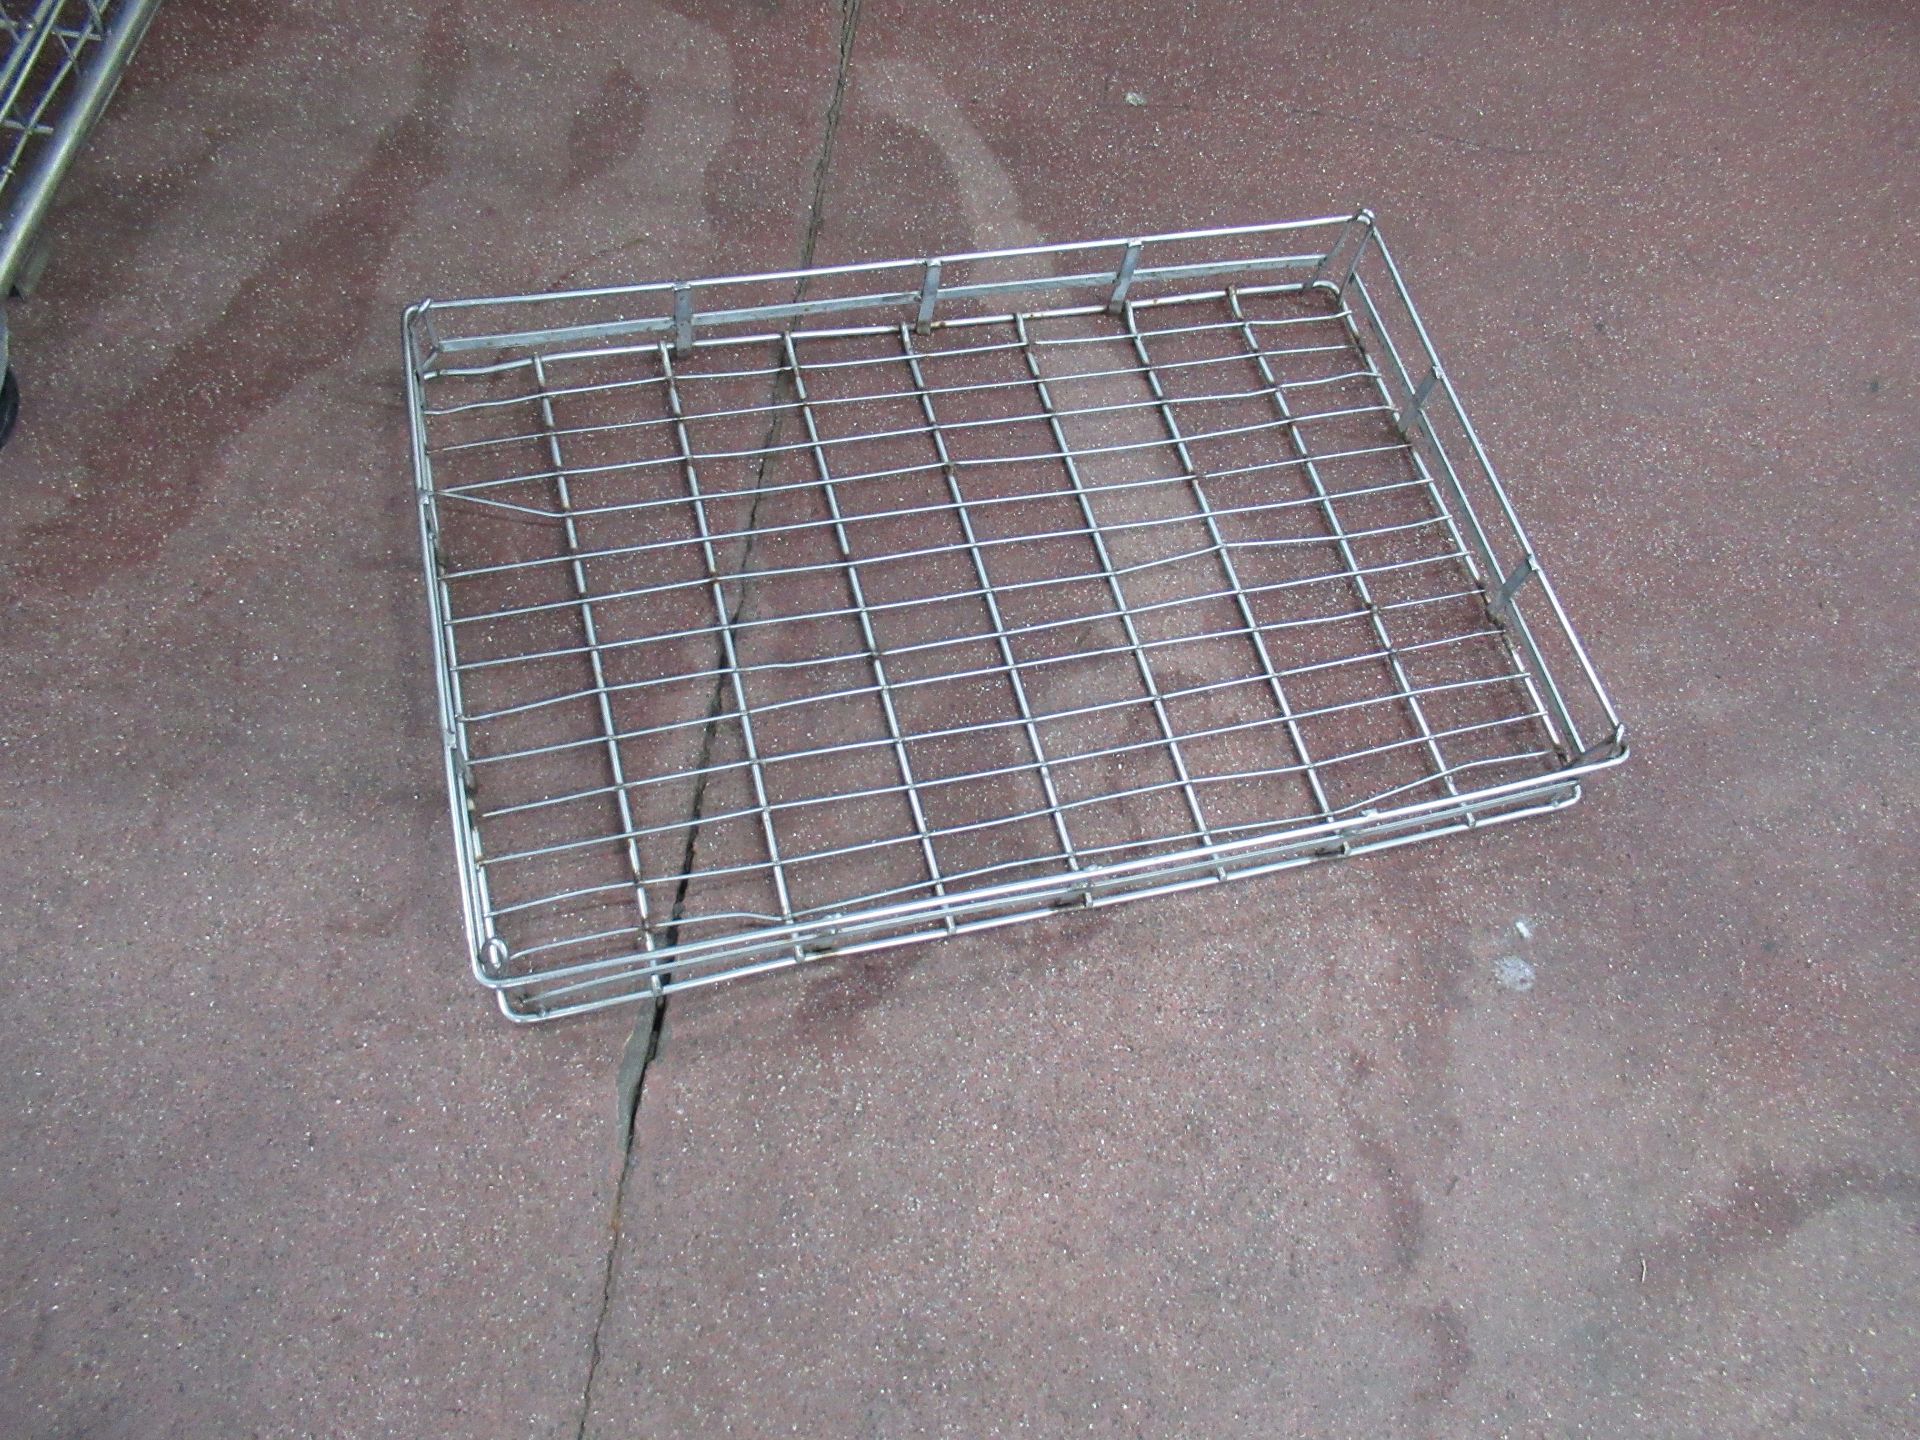 280 Stainless steel wire mesh stacking baskets, 800 x 520 x 75mm high, with 19 dollies - Image 3 of 5